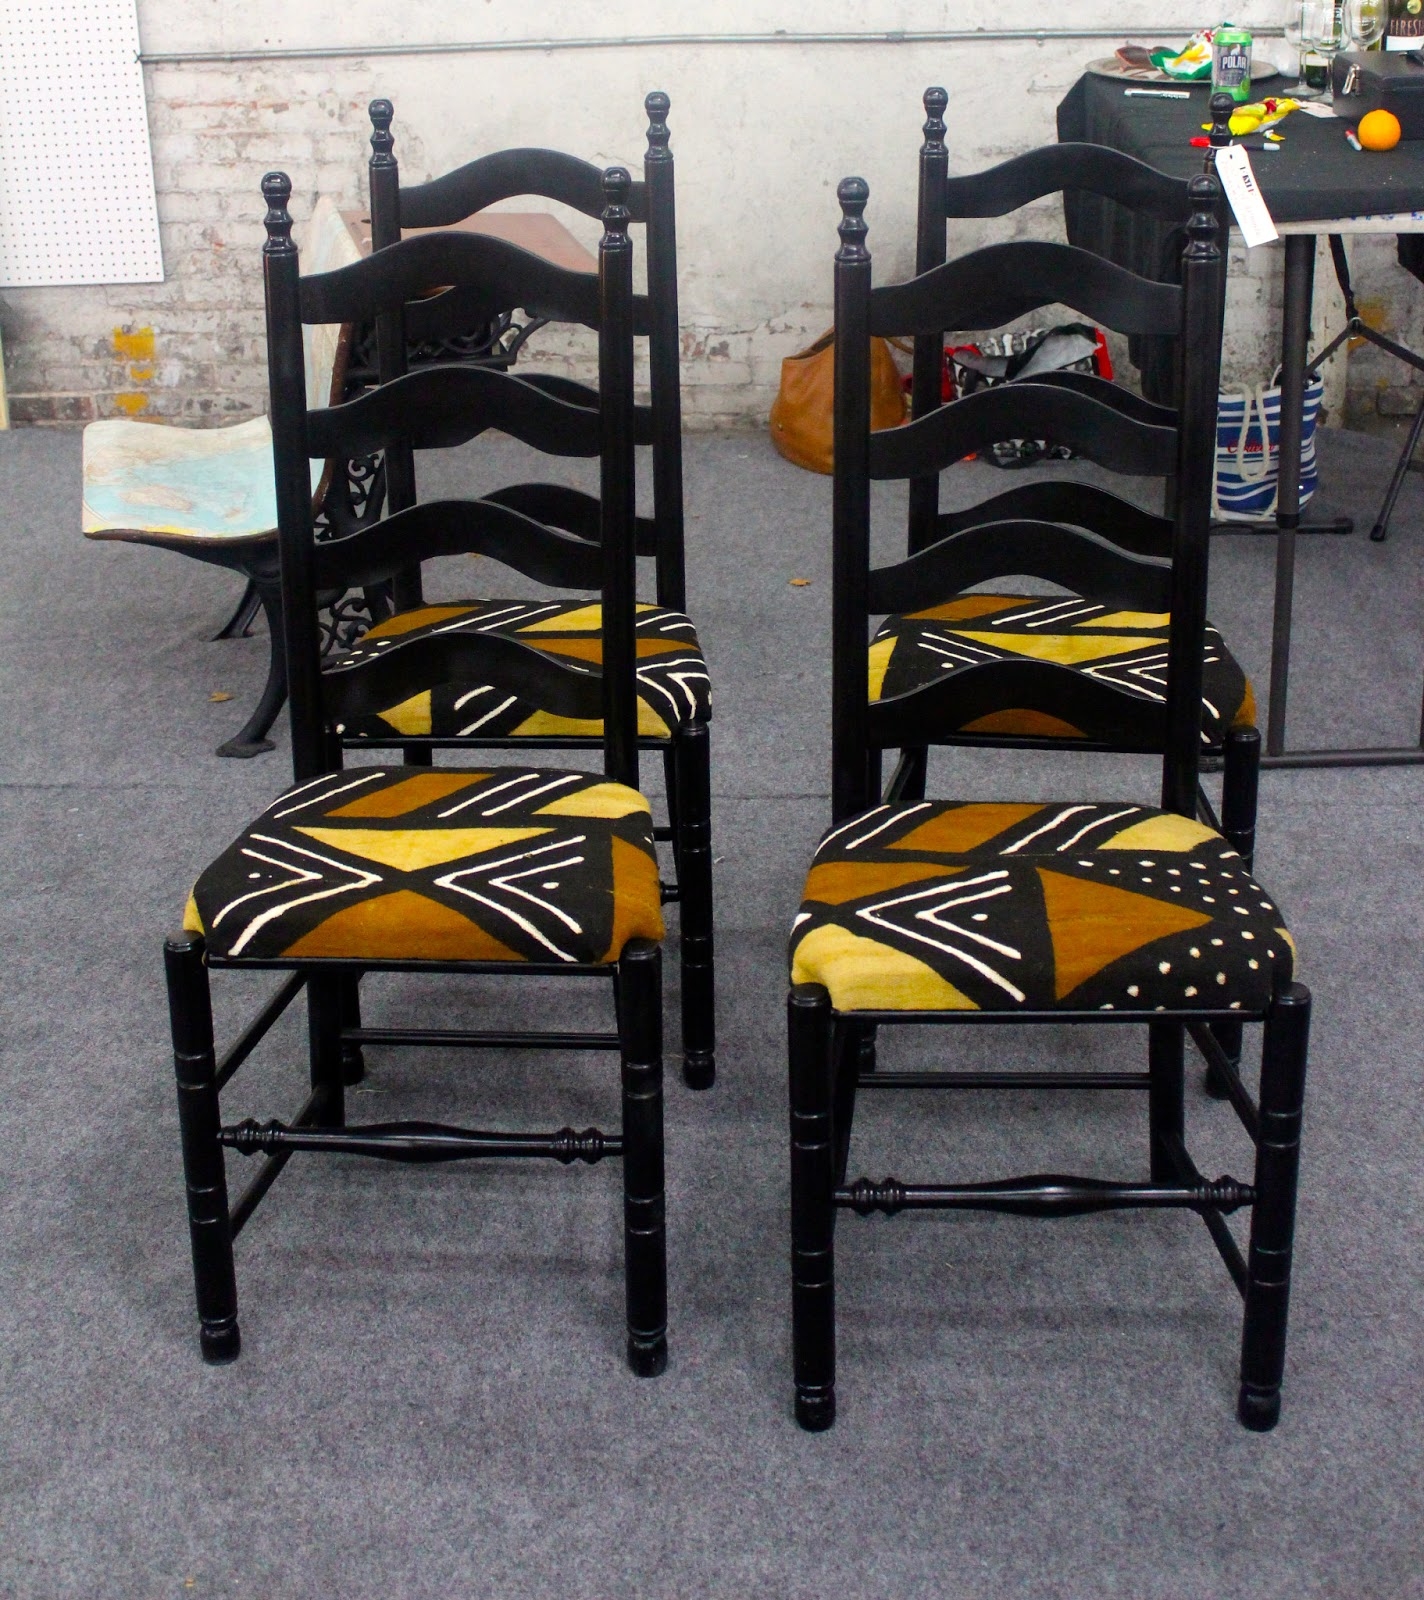 African prints in fashion diy furniture restoration with african prints